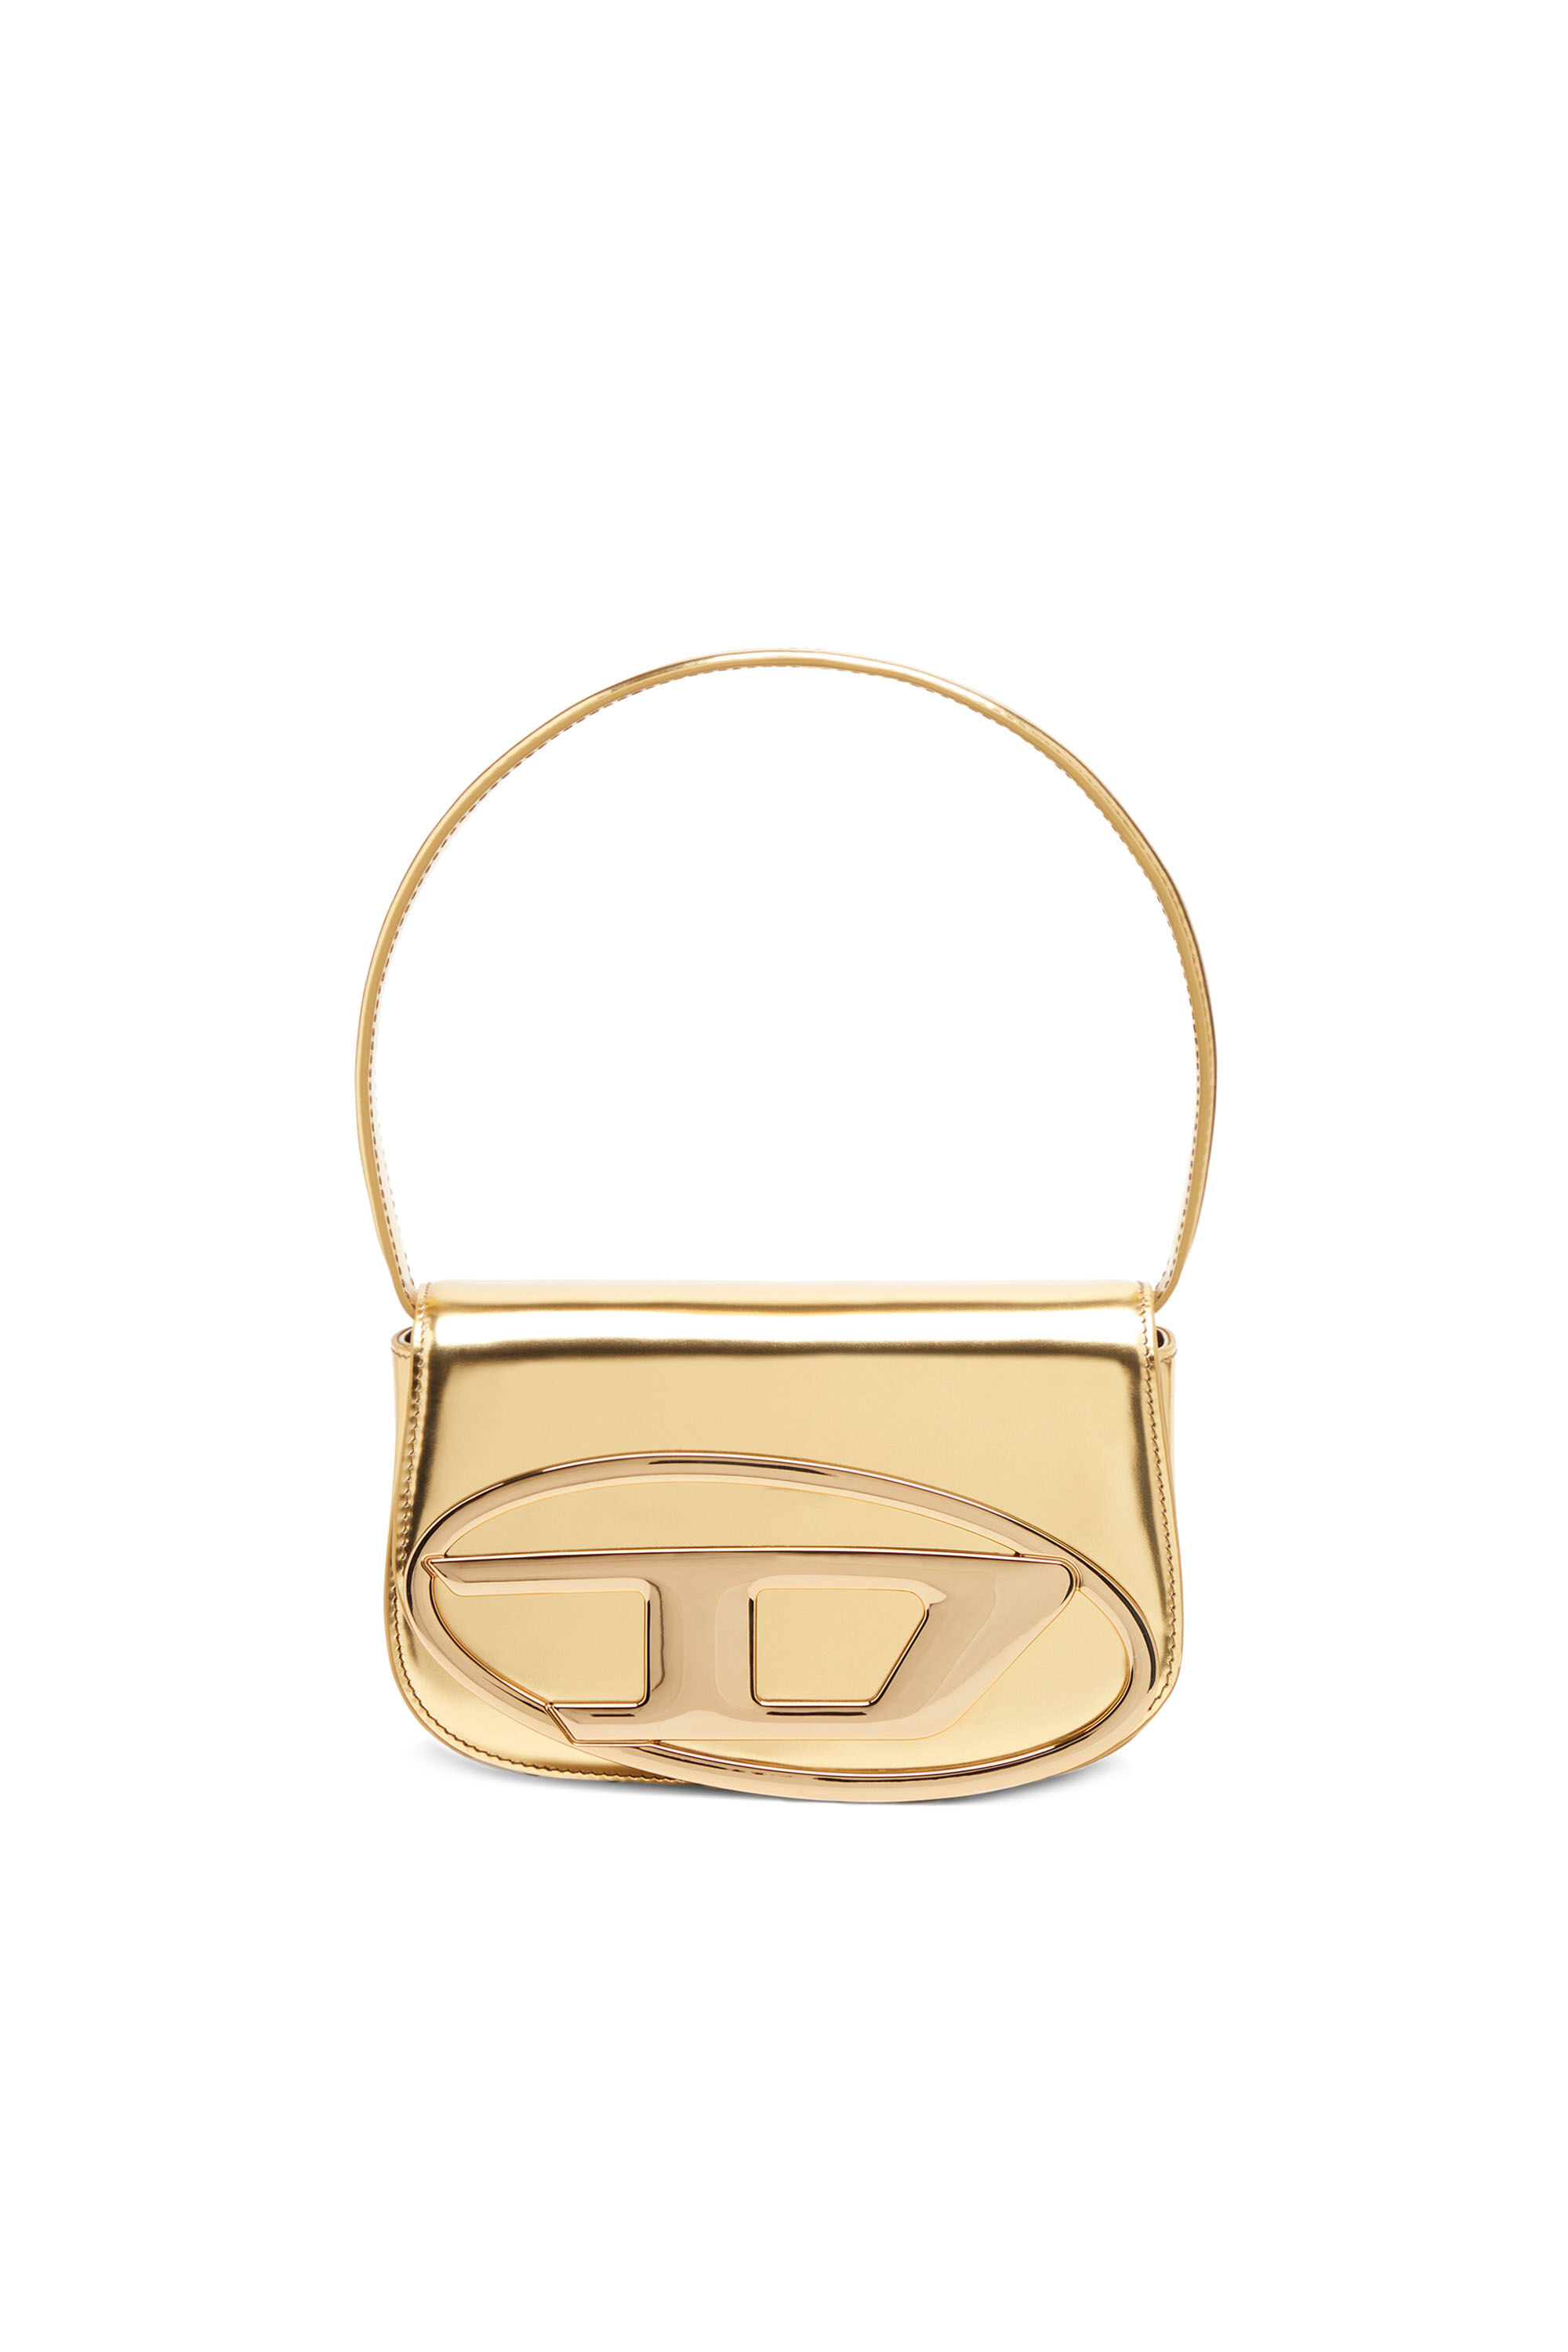 Diesel - 1DR, Woman 1DR-Iconic shoulder bag in mirrored leather in Oro - Image 1